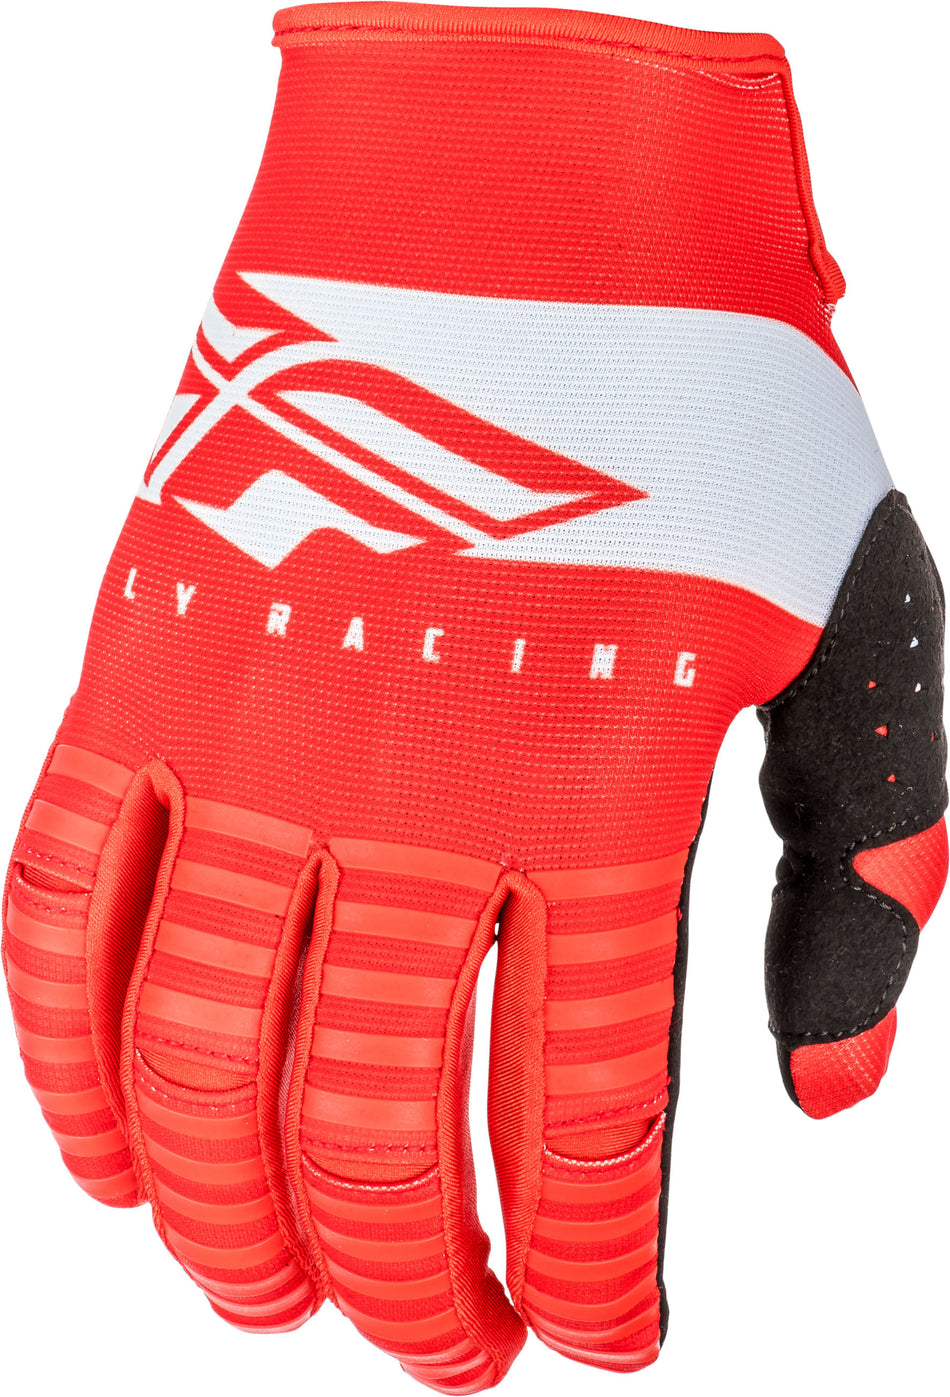 FLY RACING Kinetic Shield Gloves Red/White Sz 08 372-41208